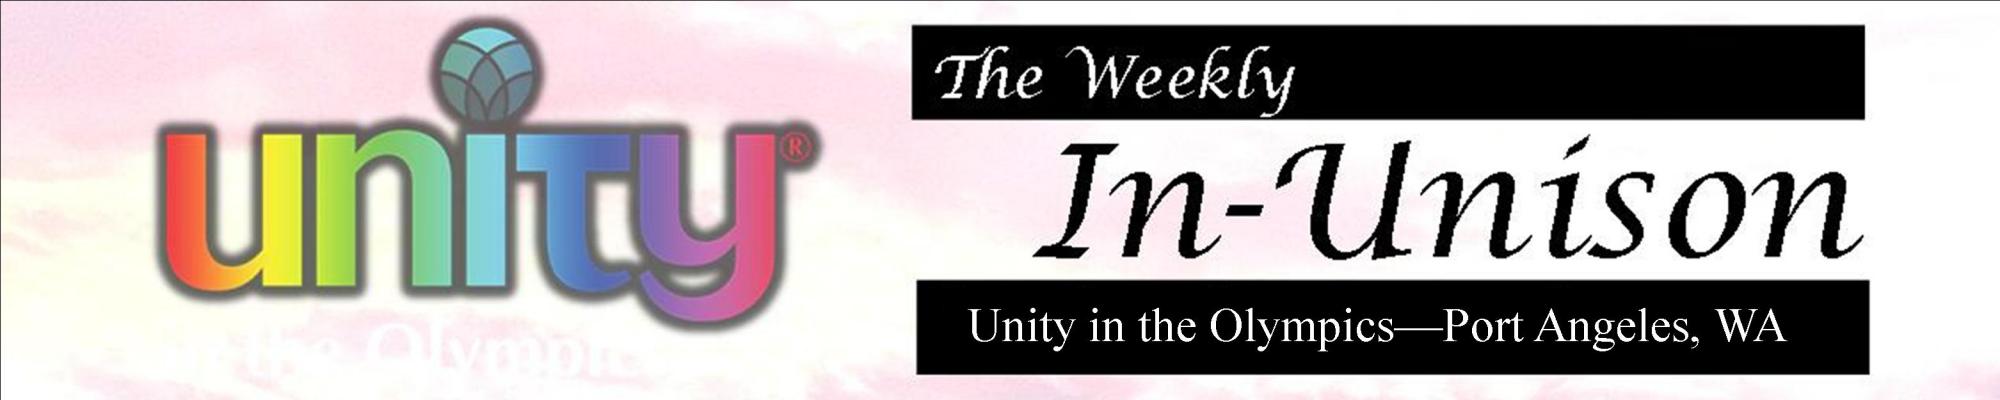 The Weekly IN-UNISON 2023 December 13th Edition